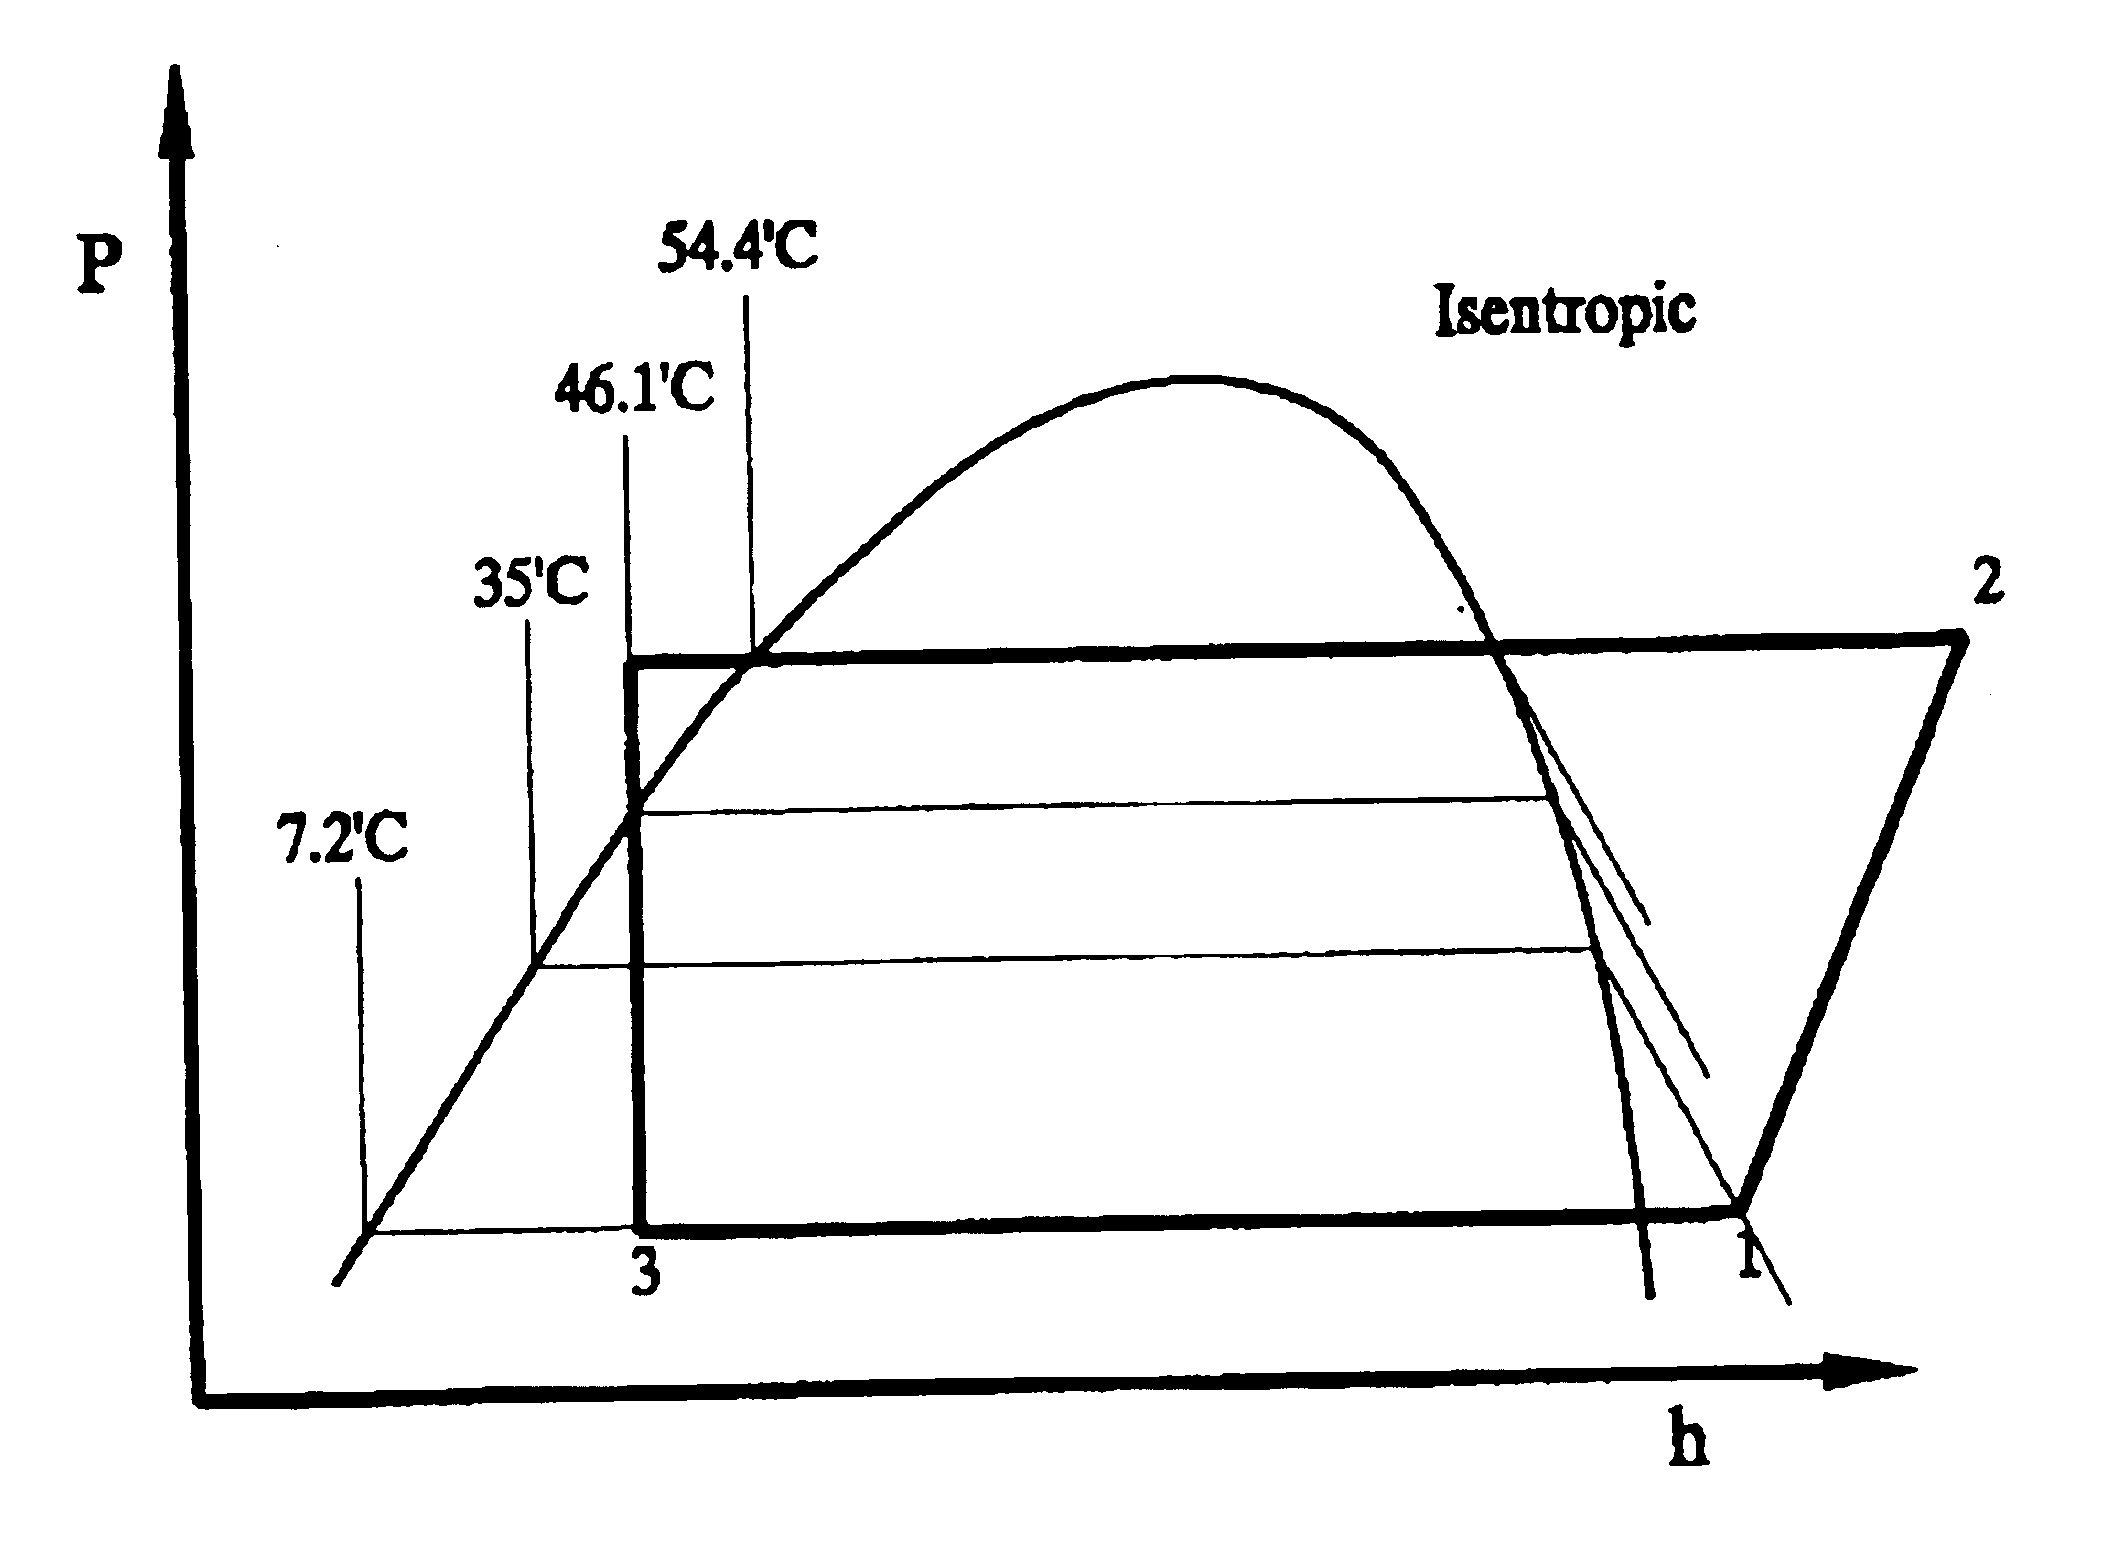 Composition of refrigerant mixtures for high back pressure condition